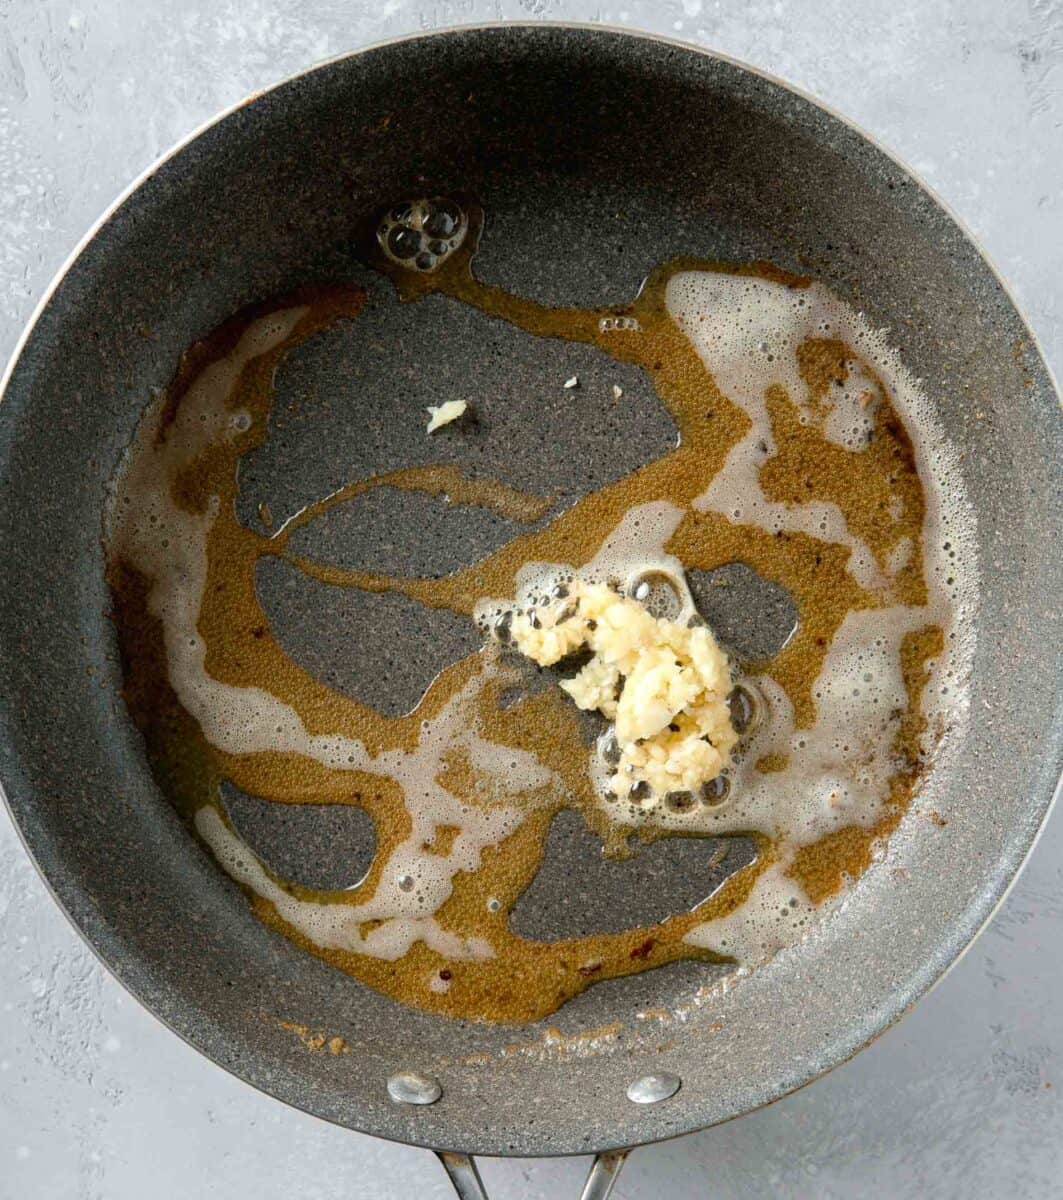 minced garlic added to melted butter in a nonstick skillet